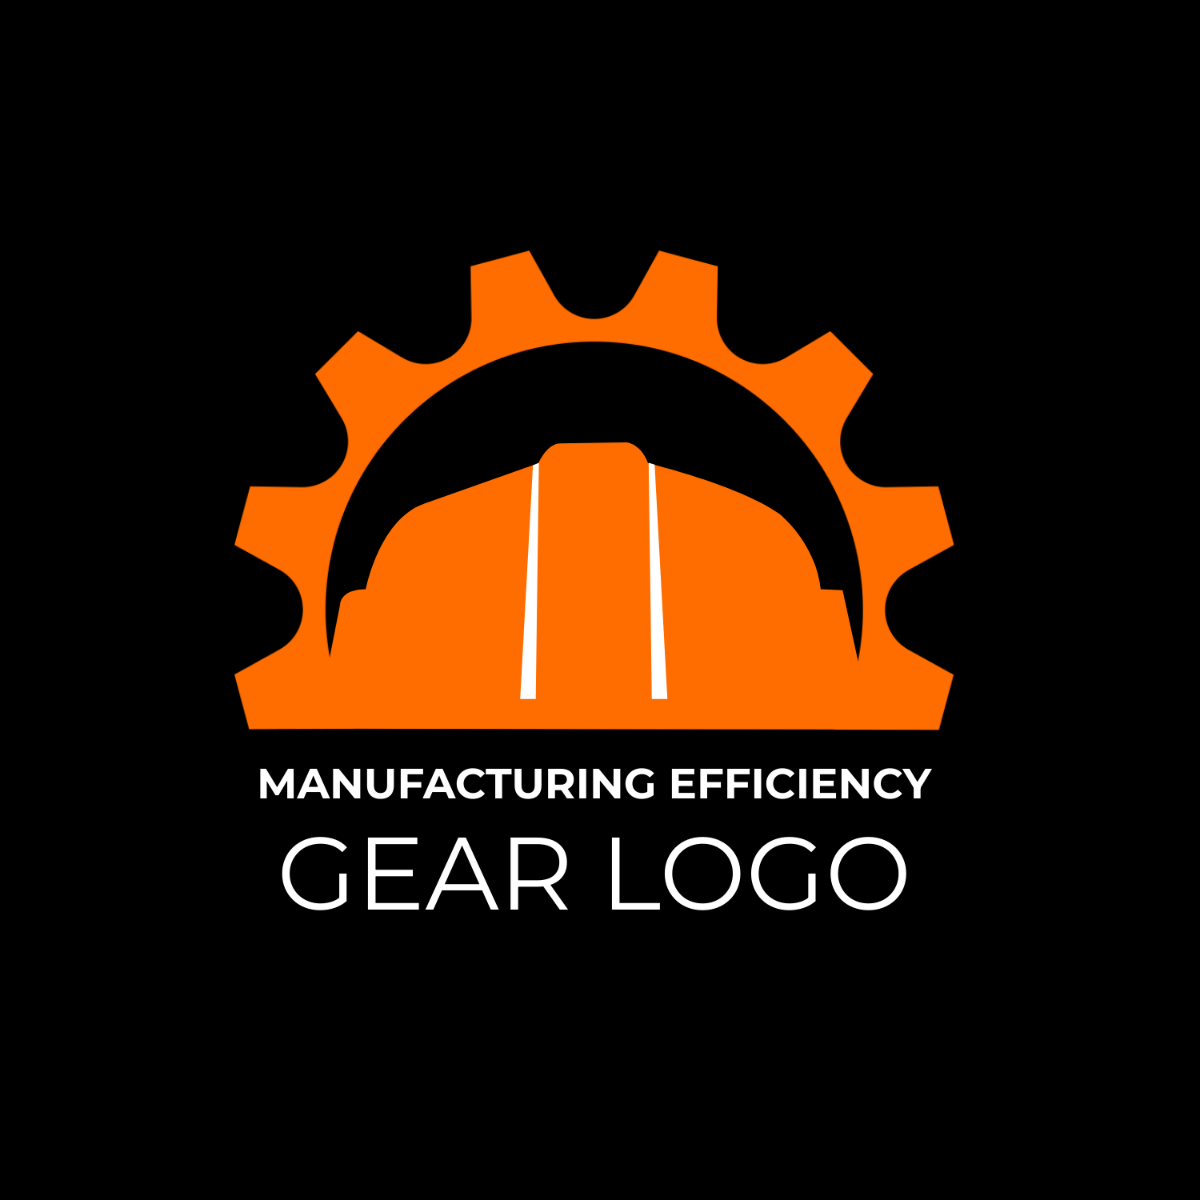 Free Manufacturing Efficiency Gear Logo Template